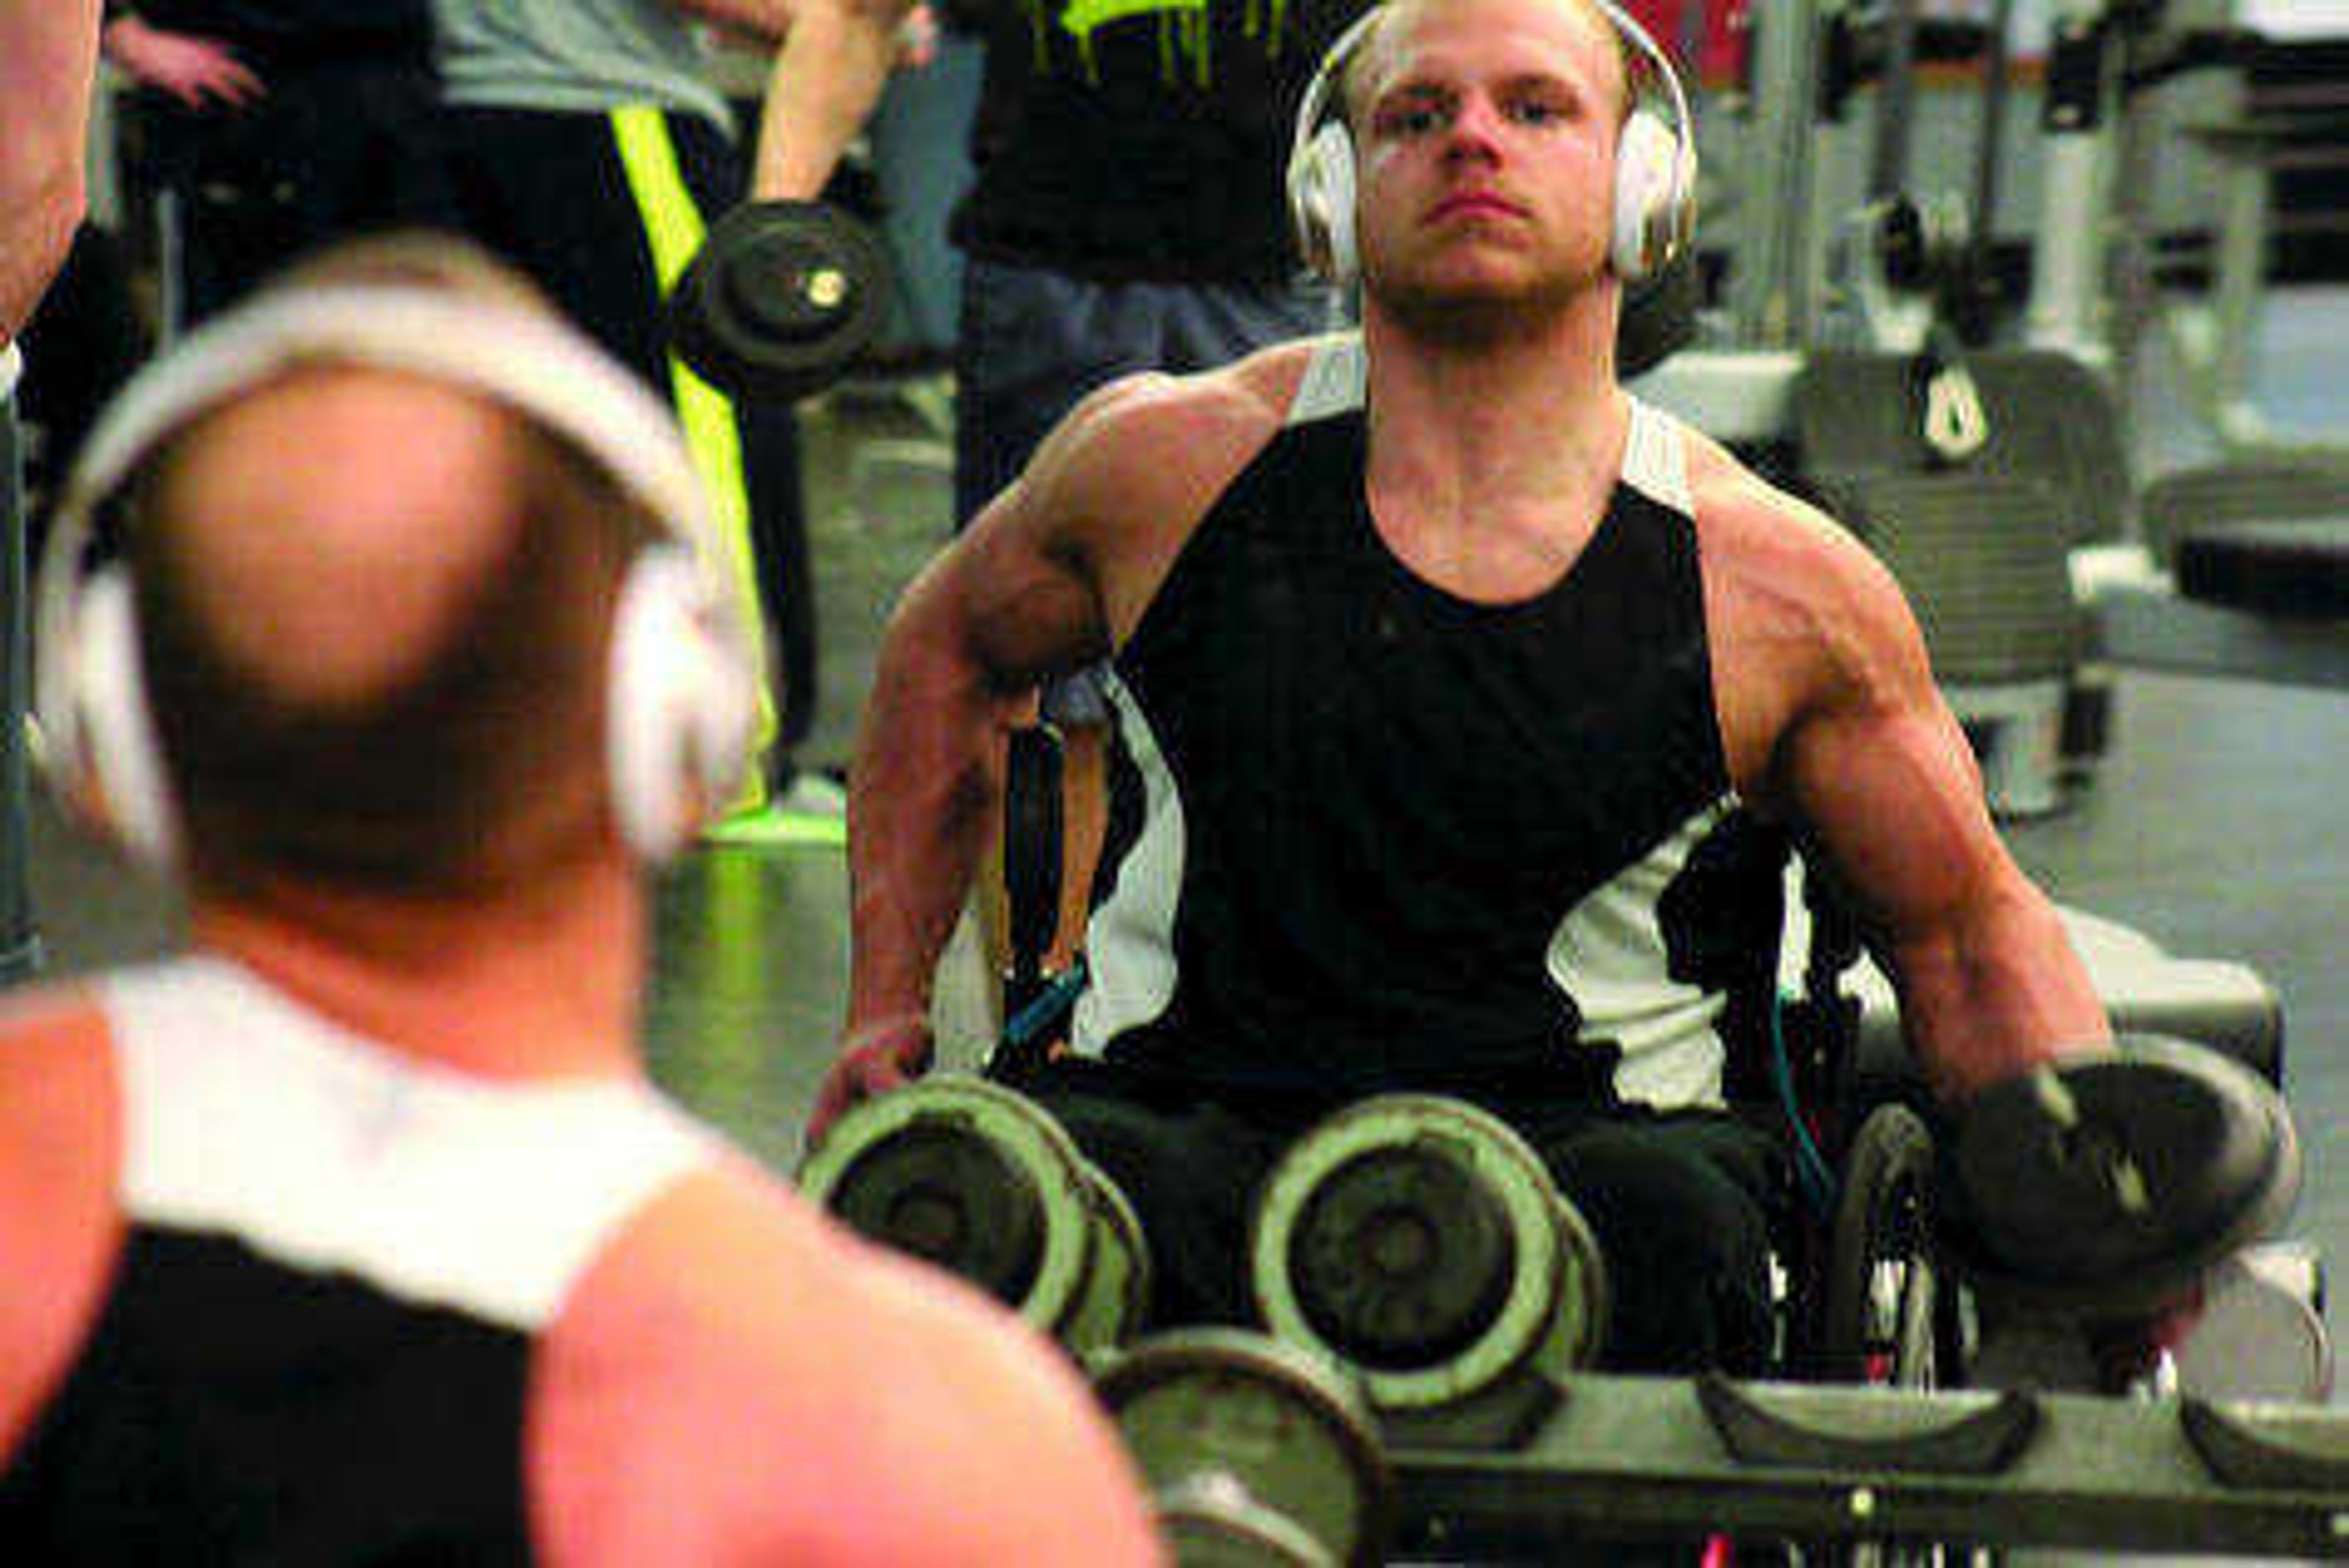 Brandon Strop doing dumbbell curls at the Student Recreation Center-North. Photo by Michael Stamper